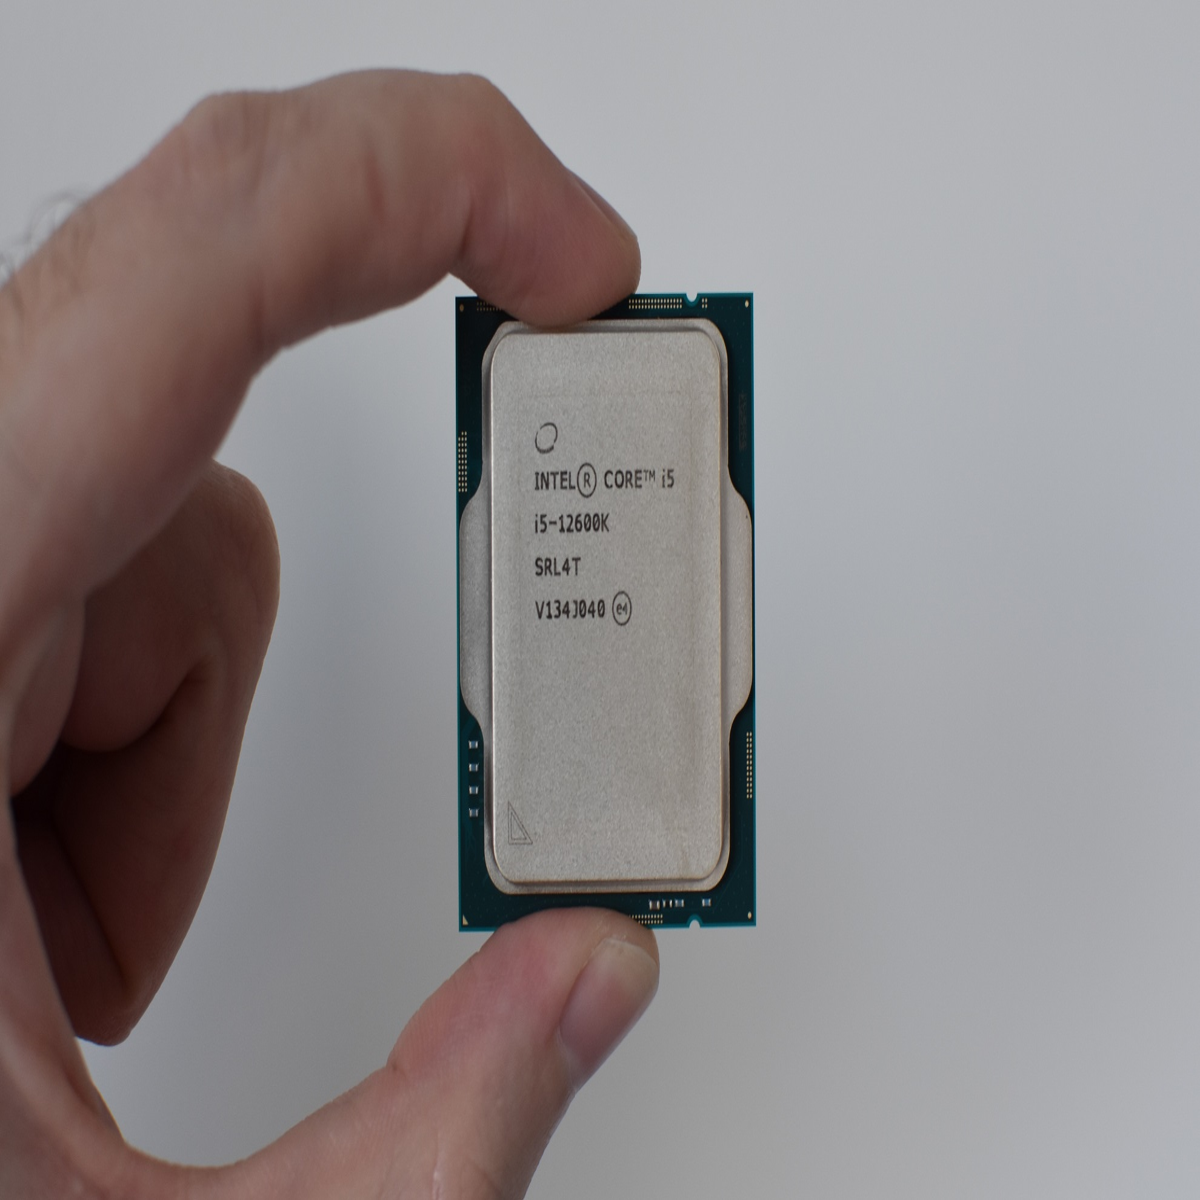 The new Intel Core i5-12600K CPU is already up to £45 off for Black Friday